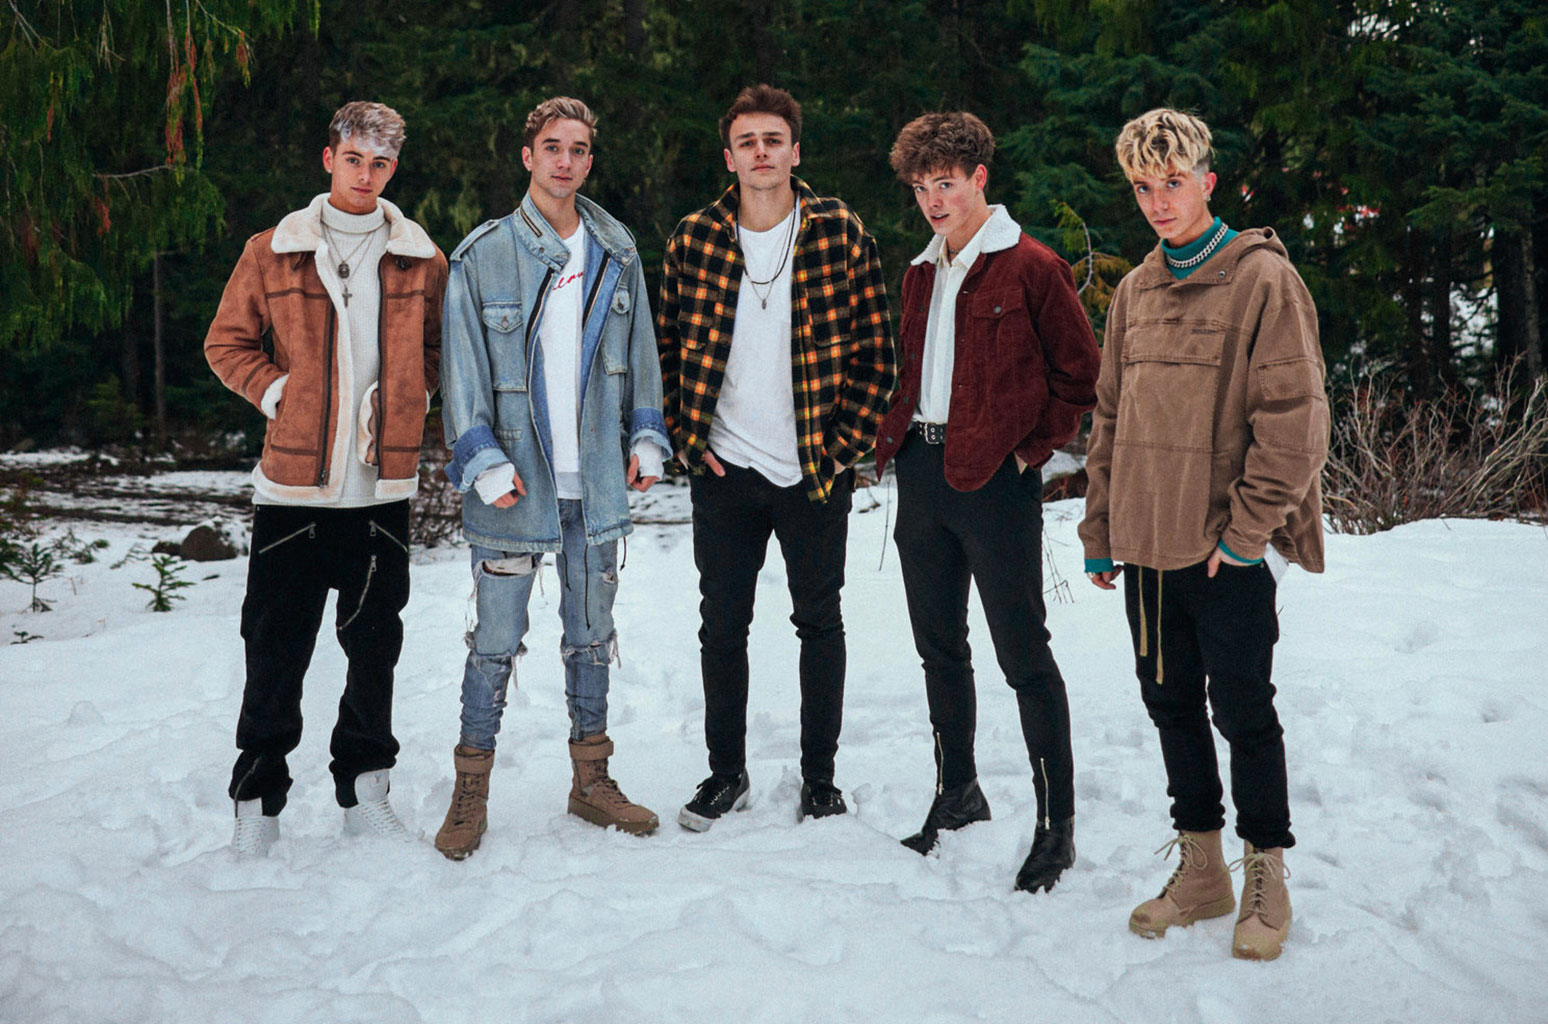 Why Don't We Will Give You 'Chills' With Romantic Winter Wonderland Video: Watch - www.billboard.com